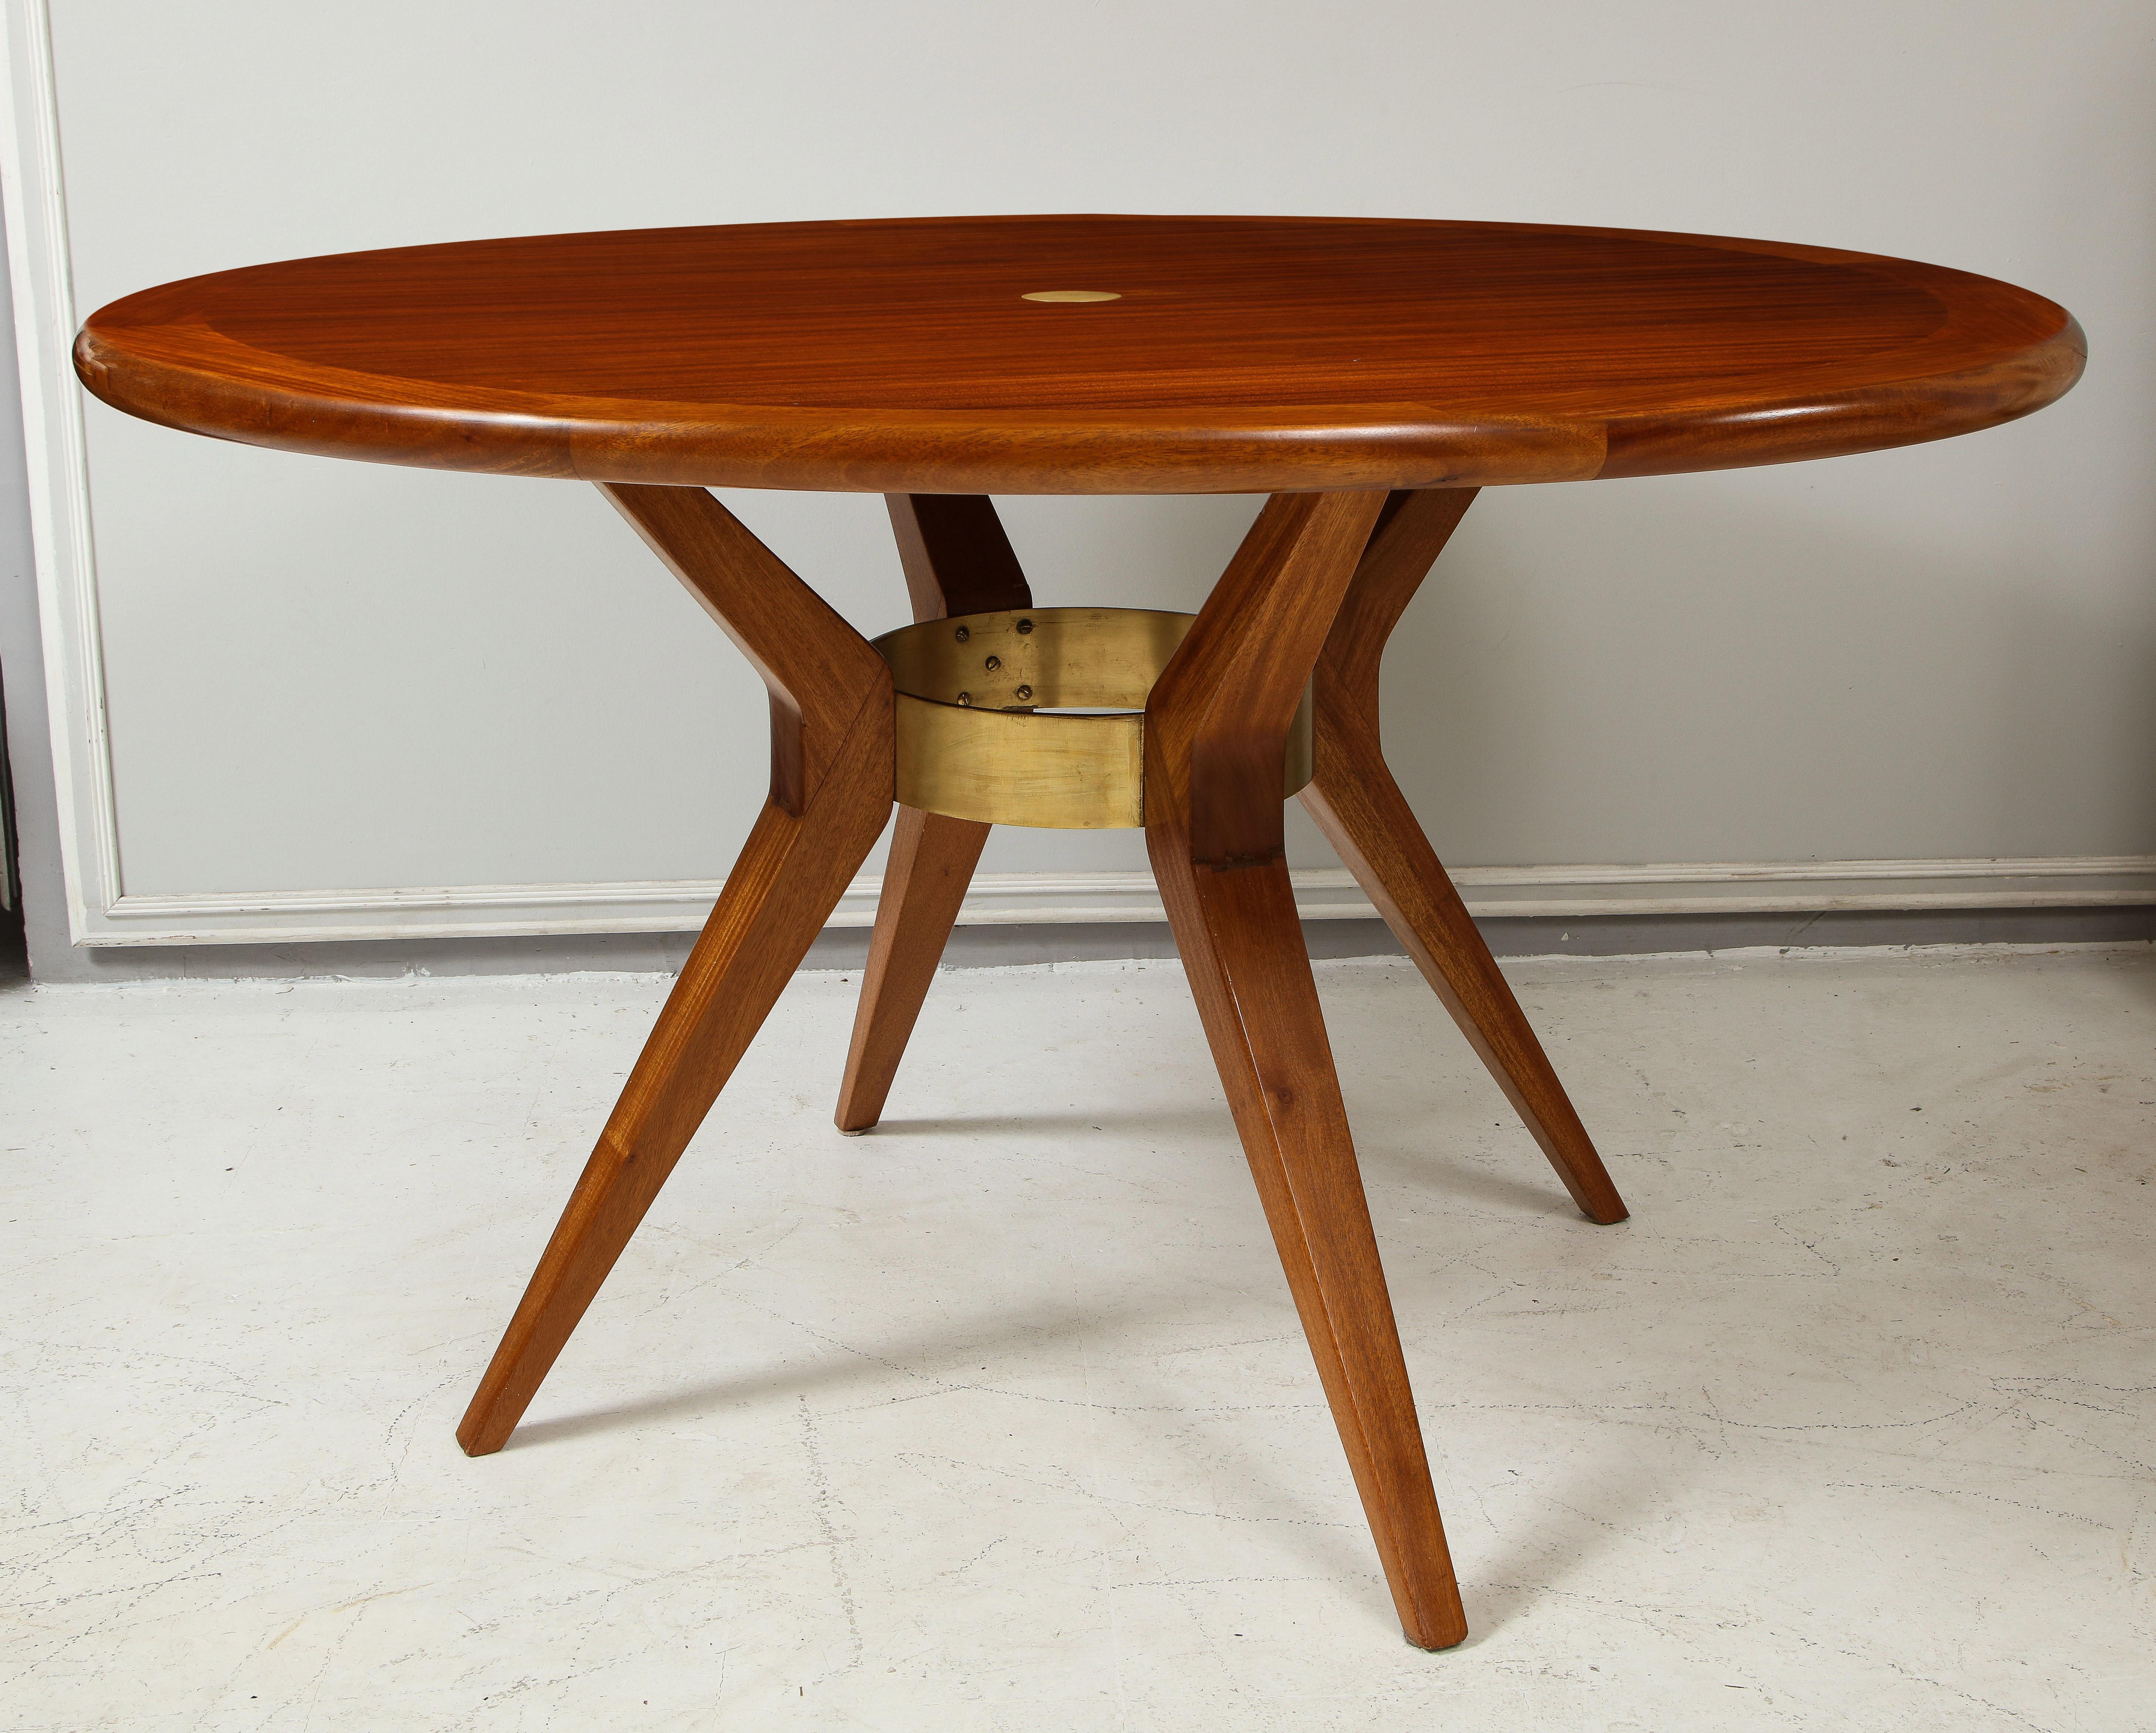 Italian Mid-Century Modern mahogany circular dining table/ center table with central bronze ring on tripod base.